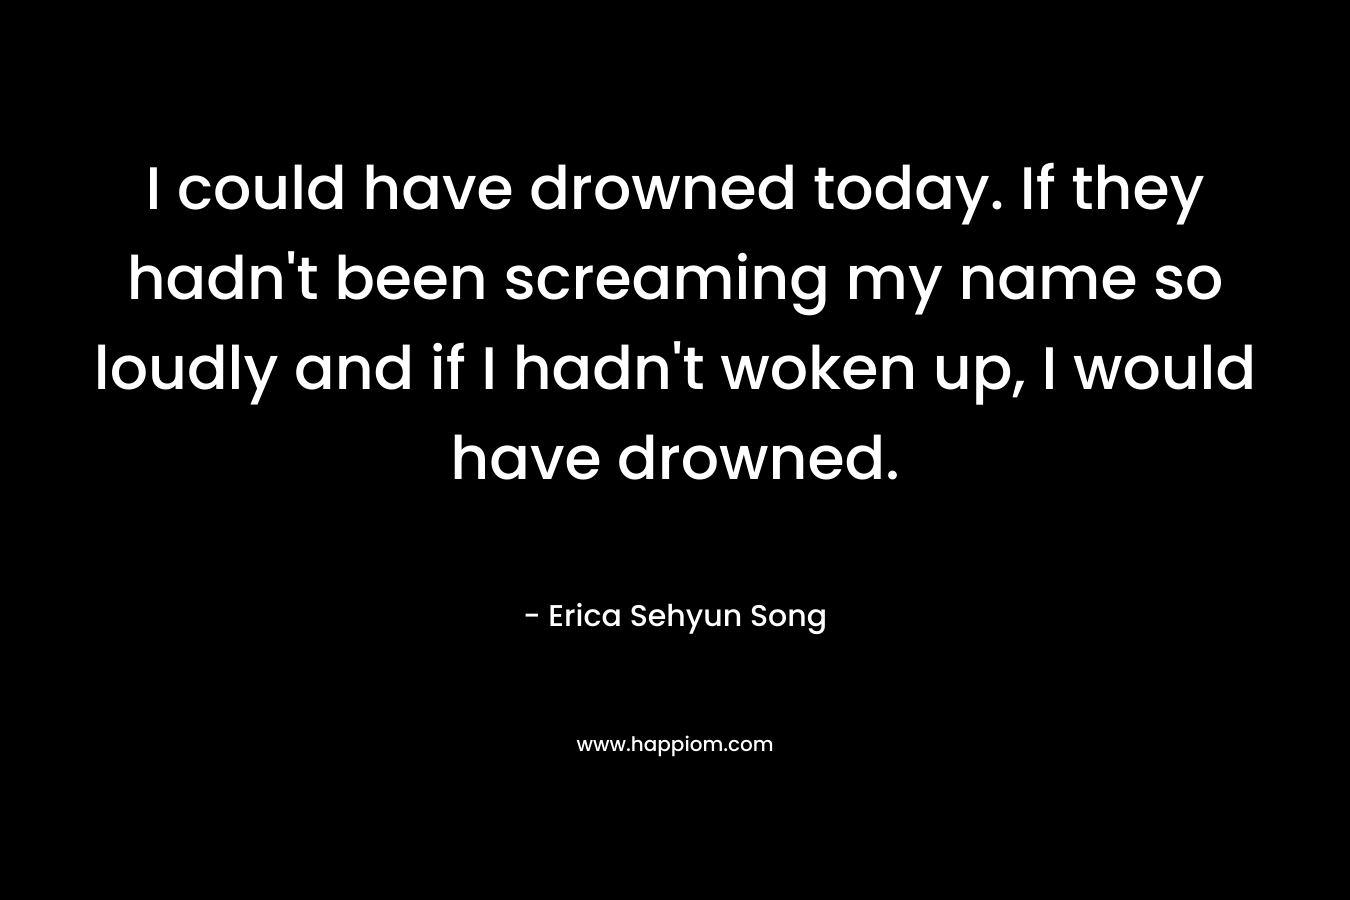 I could have drowned today. If they hadn’t been screaming my name so loudly and if I hadn’t woken up, I would have drowned. – Erica Sehyun Song